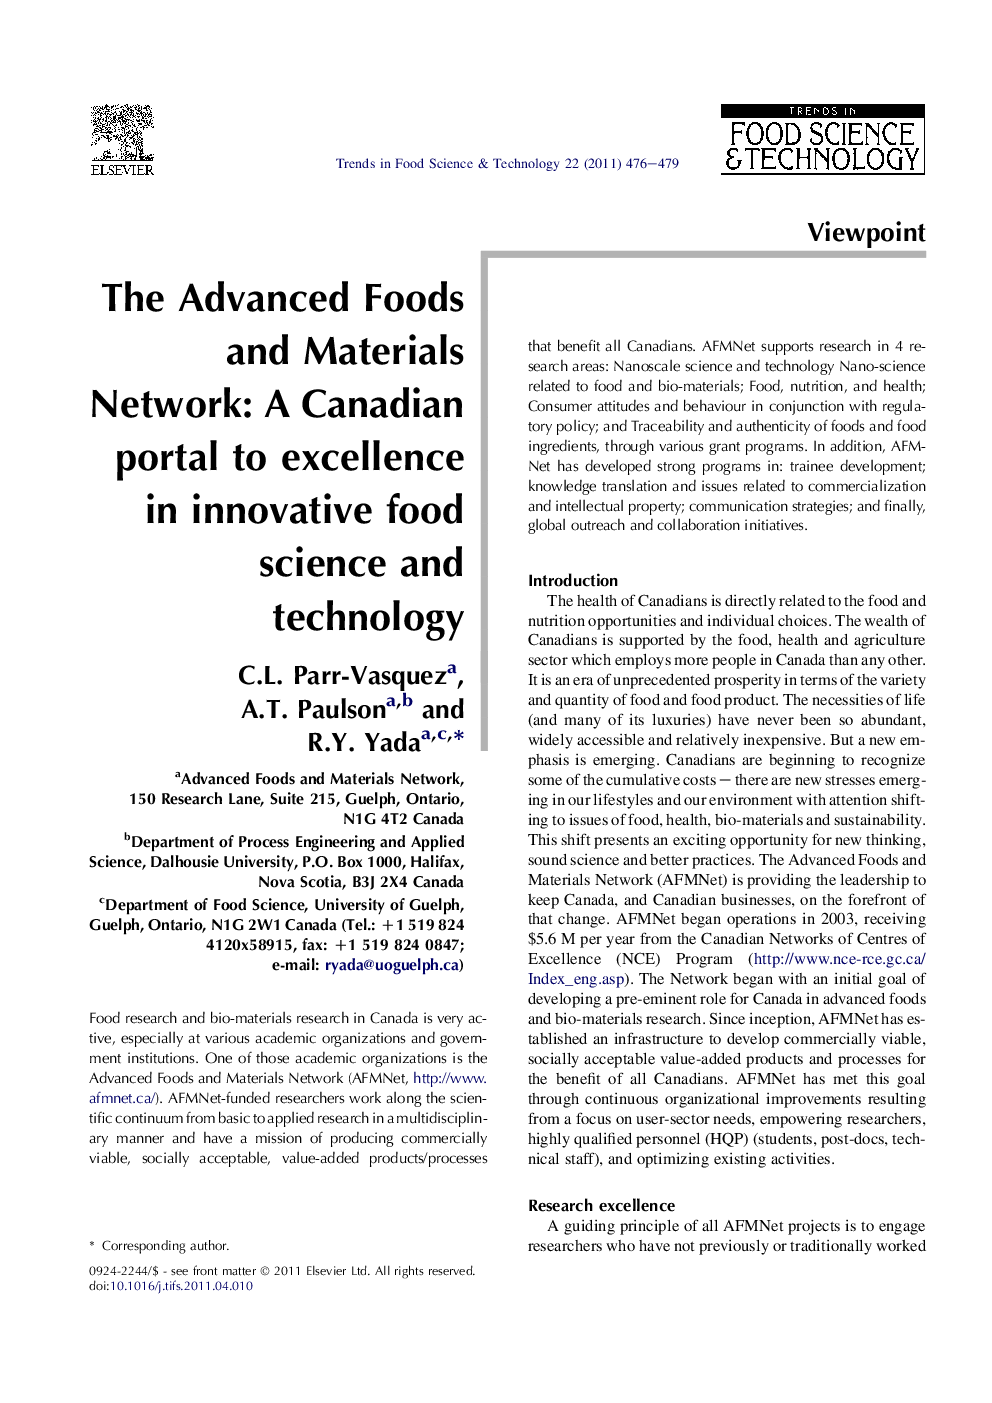 The Advanced Foods and Materials Network: A Canadian portal to excellence in innovative food science and technology